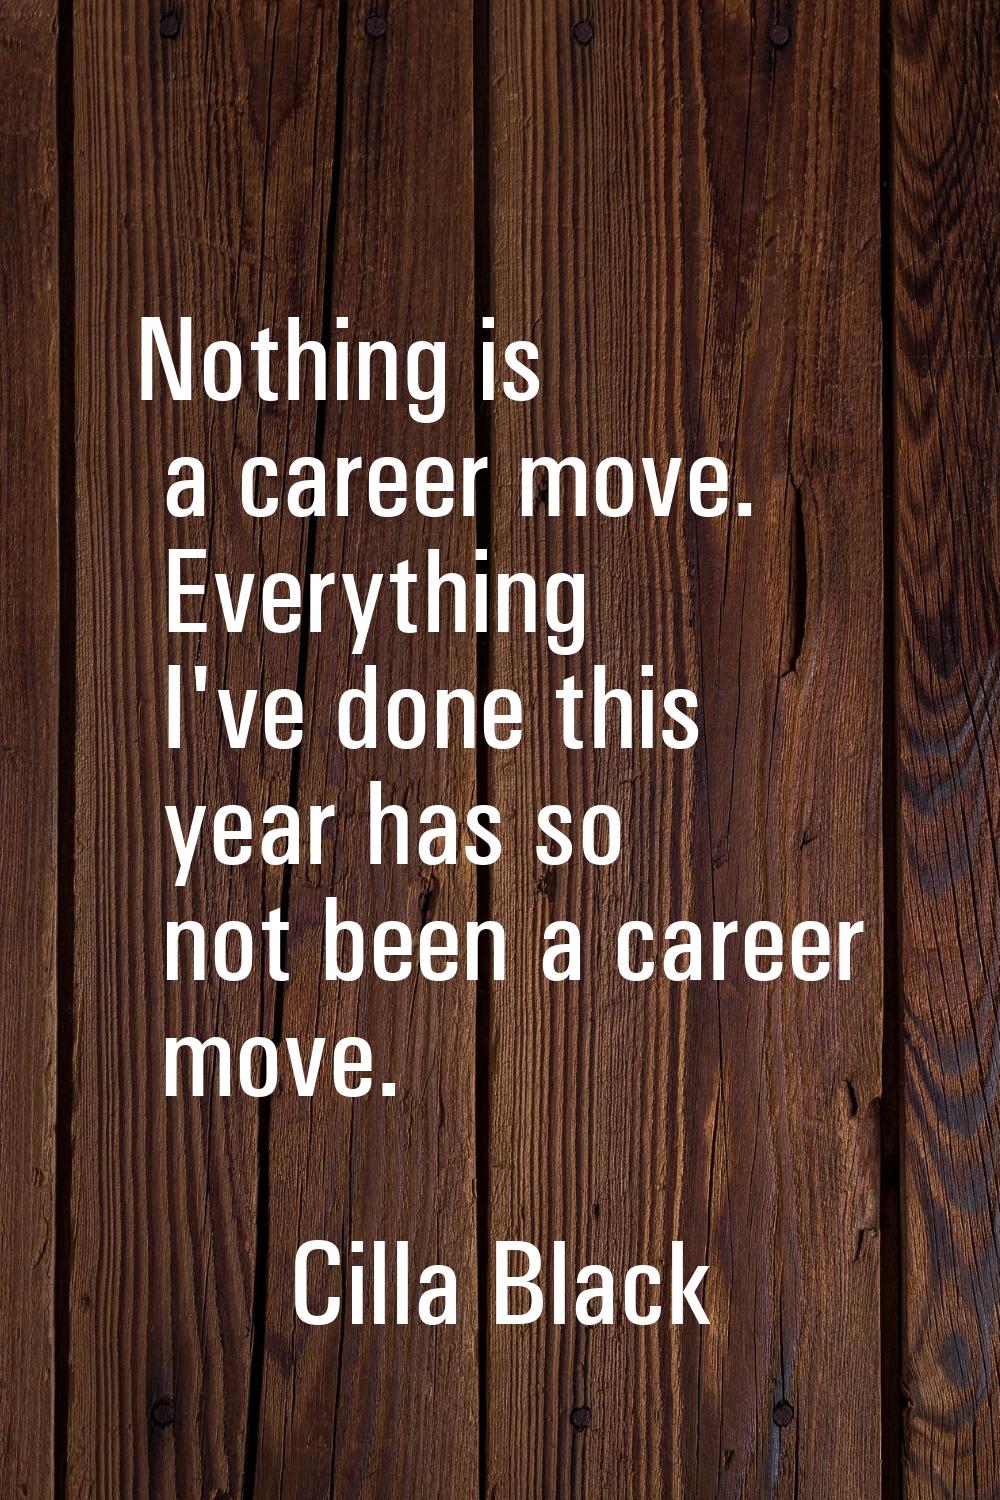 Nothing is a career move. Everything I've done this year has so not been a career move.